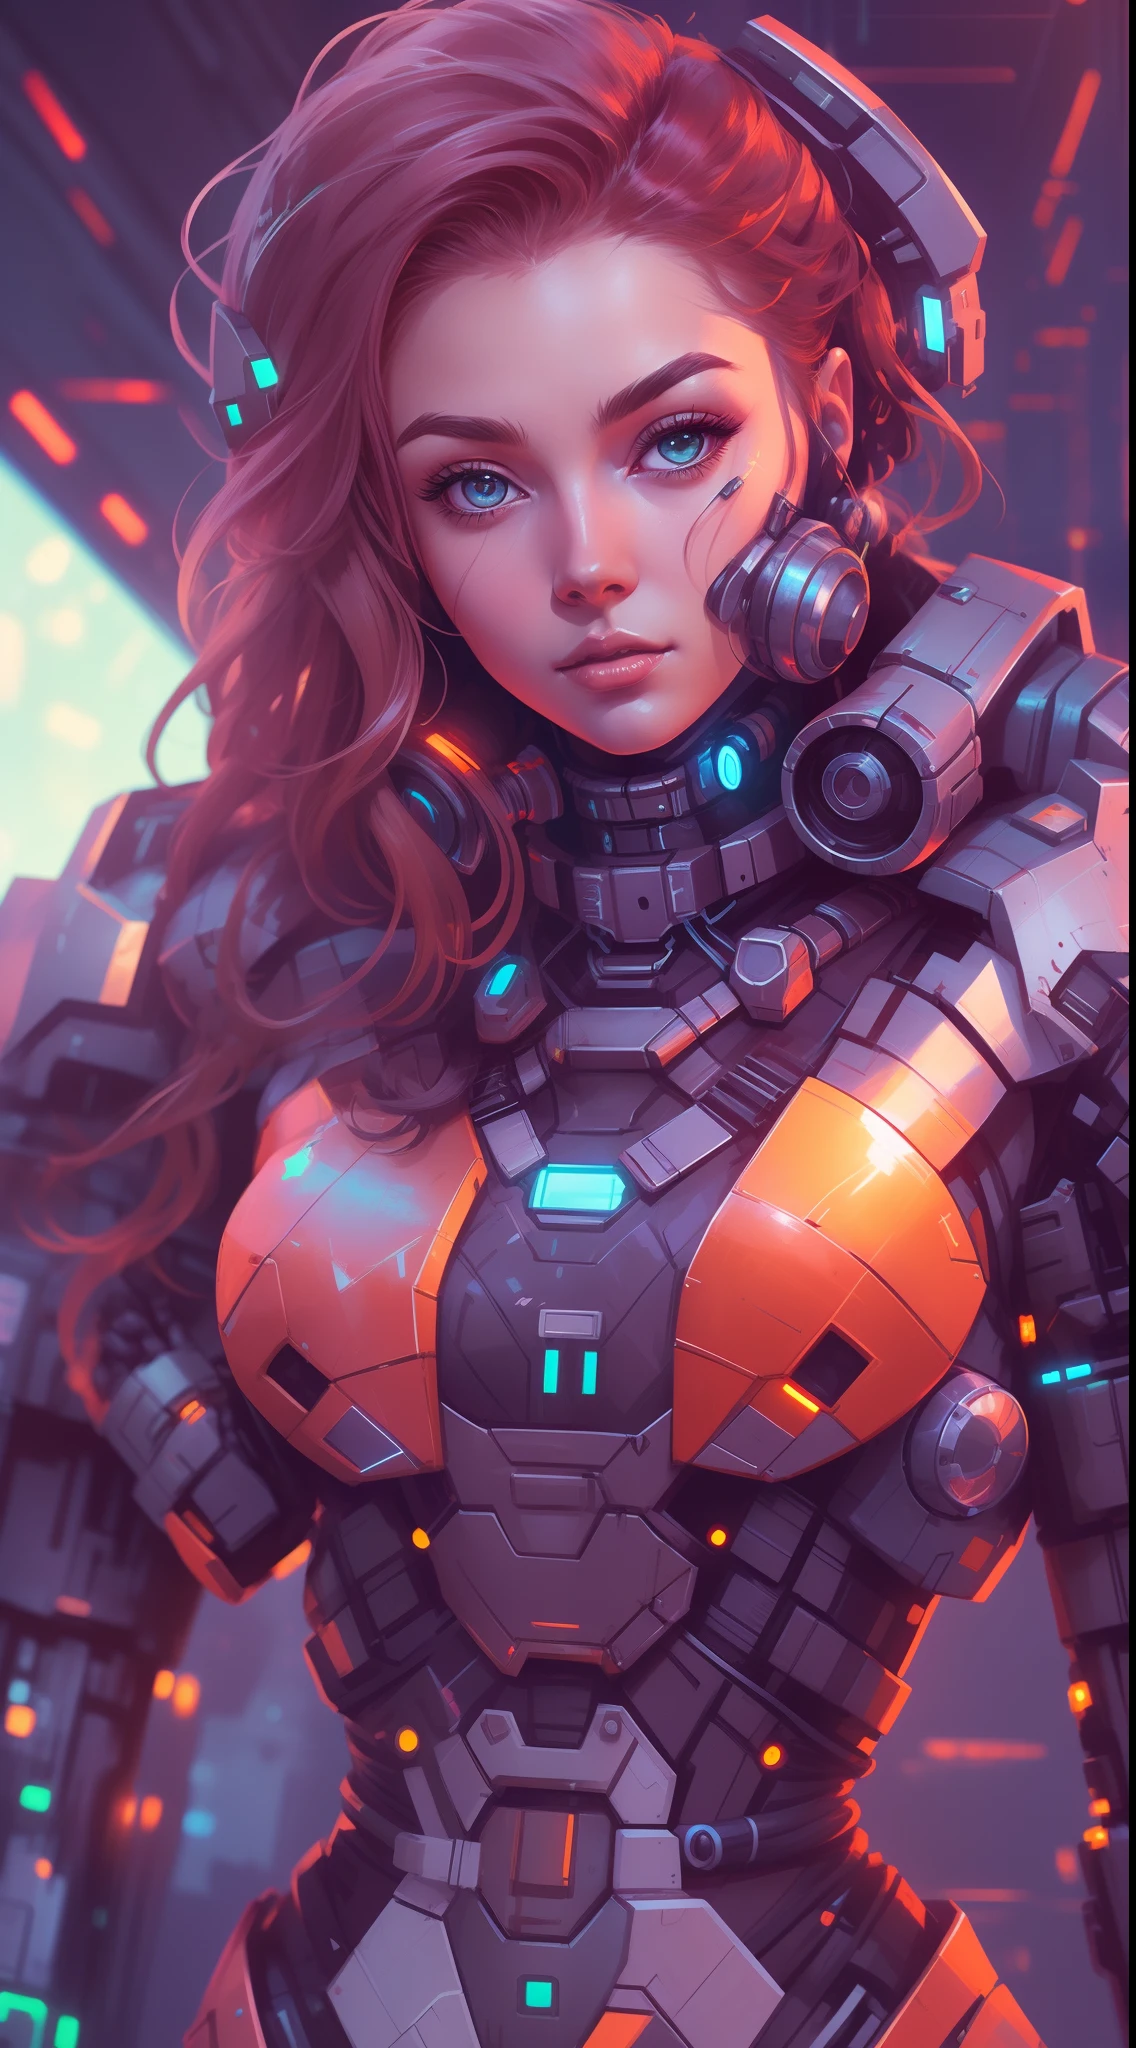 araffe woman in a futuristic suit with a gun in her hand, girl in mecha cyber armor, perfect android girl, cute cyborg girl, cyberpunk anime girl mech, female mecha, beutiful girl cyborg, cyborg girl, wojtek fus, portrait armored astronaut girl, mechanized valkyrie girl